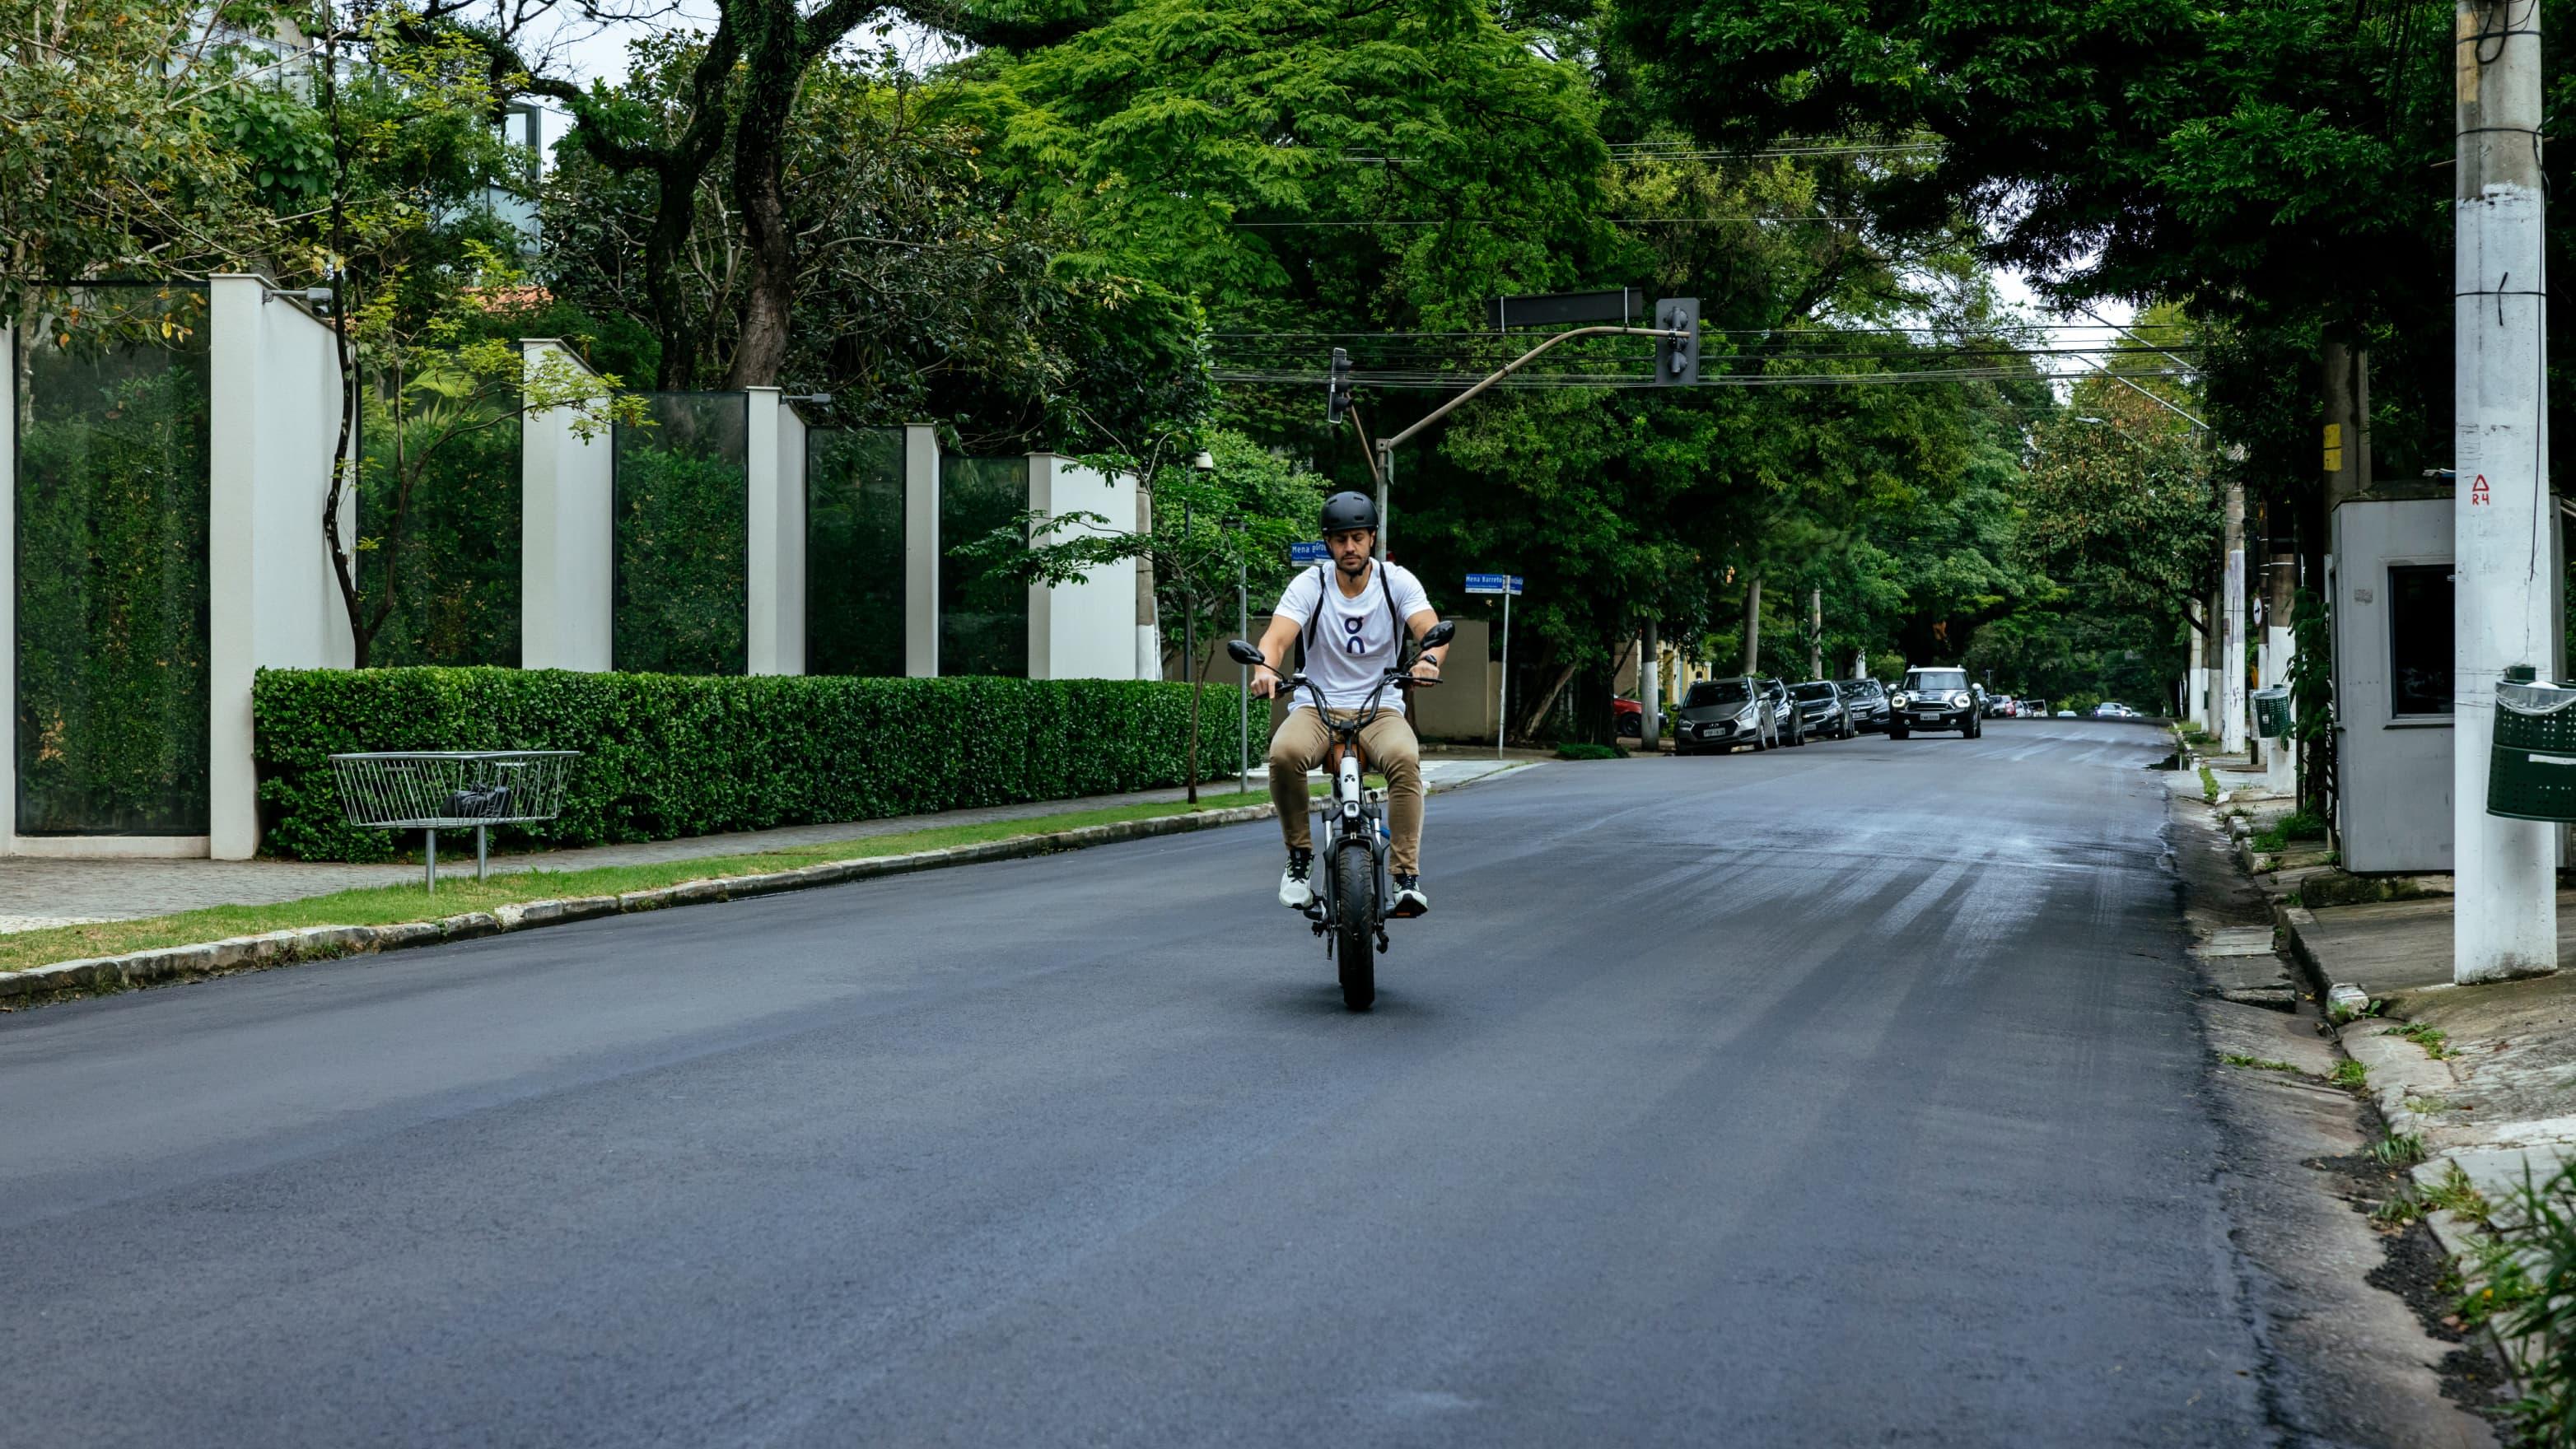 A man rides his bicycle on a street